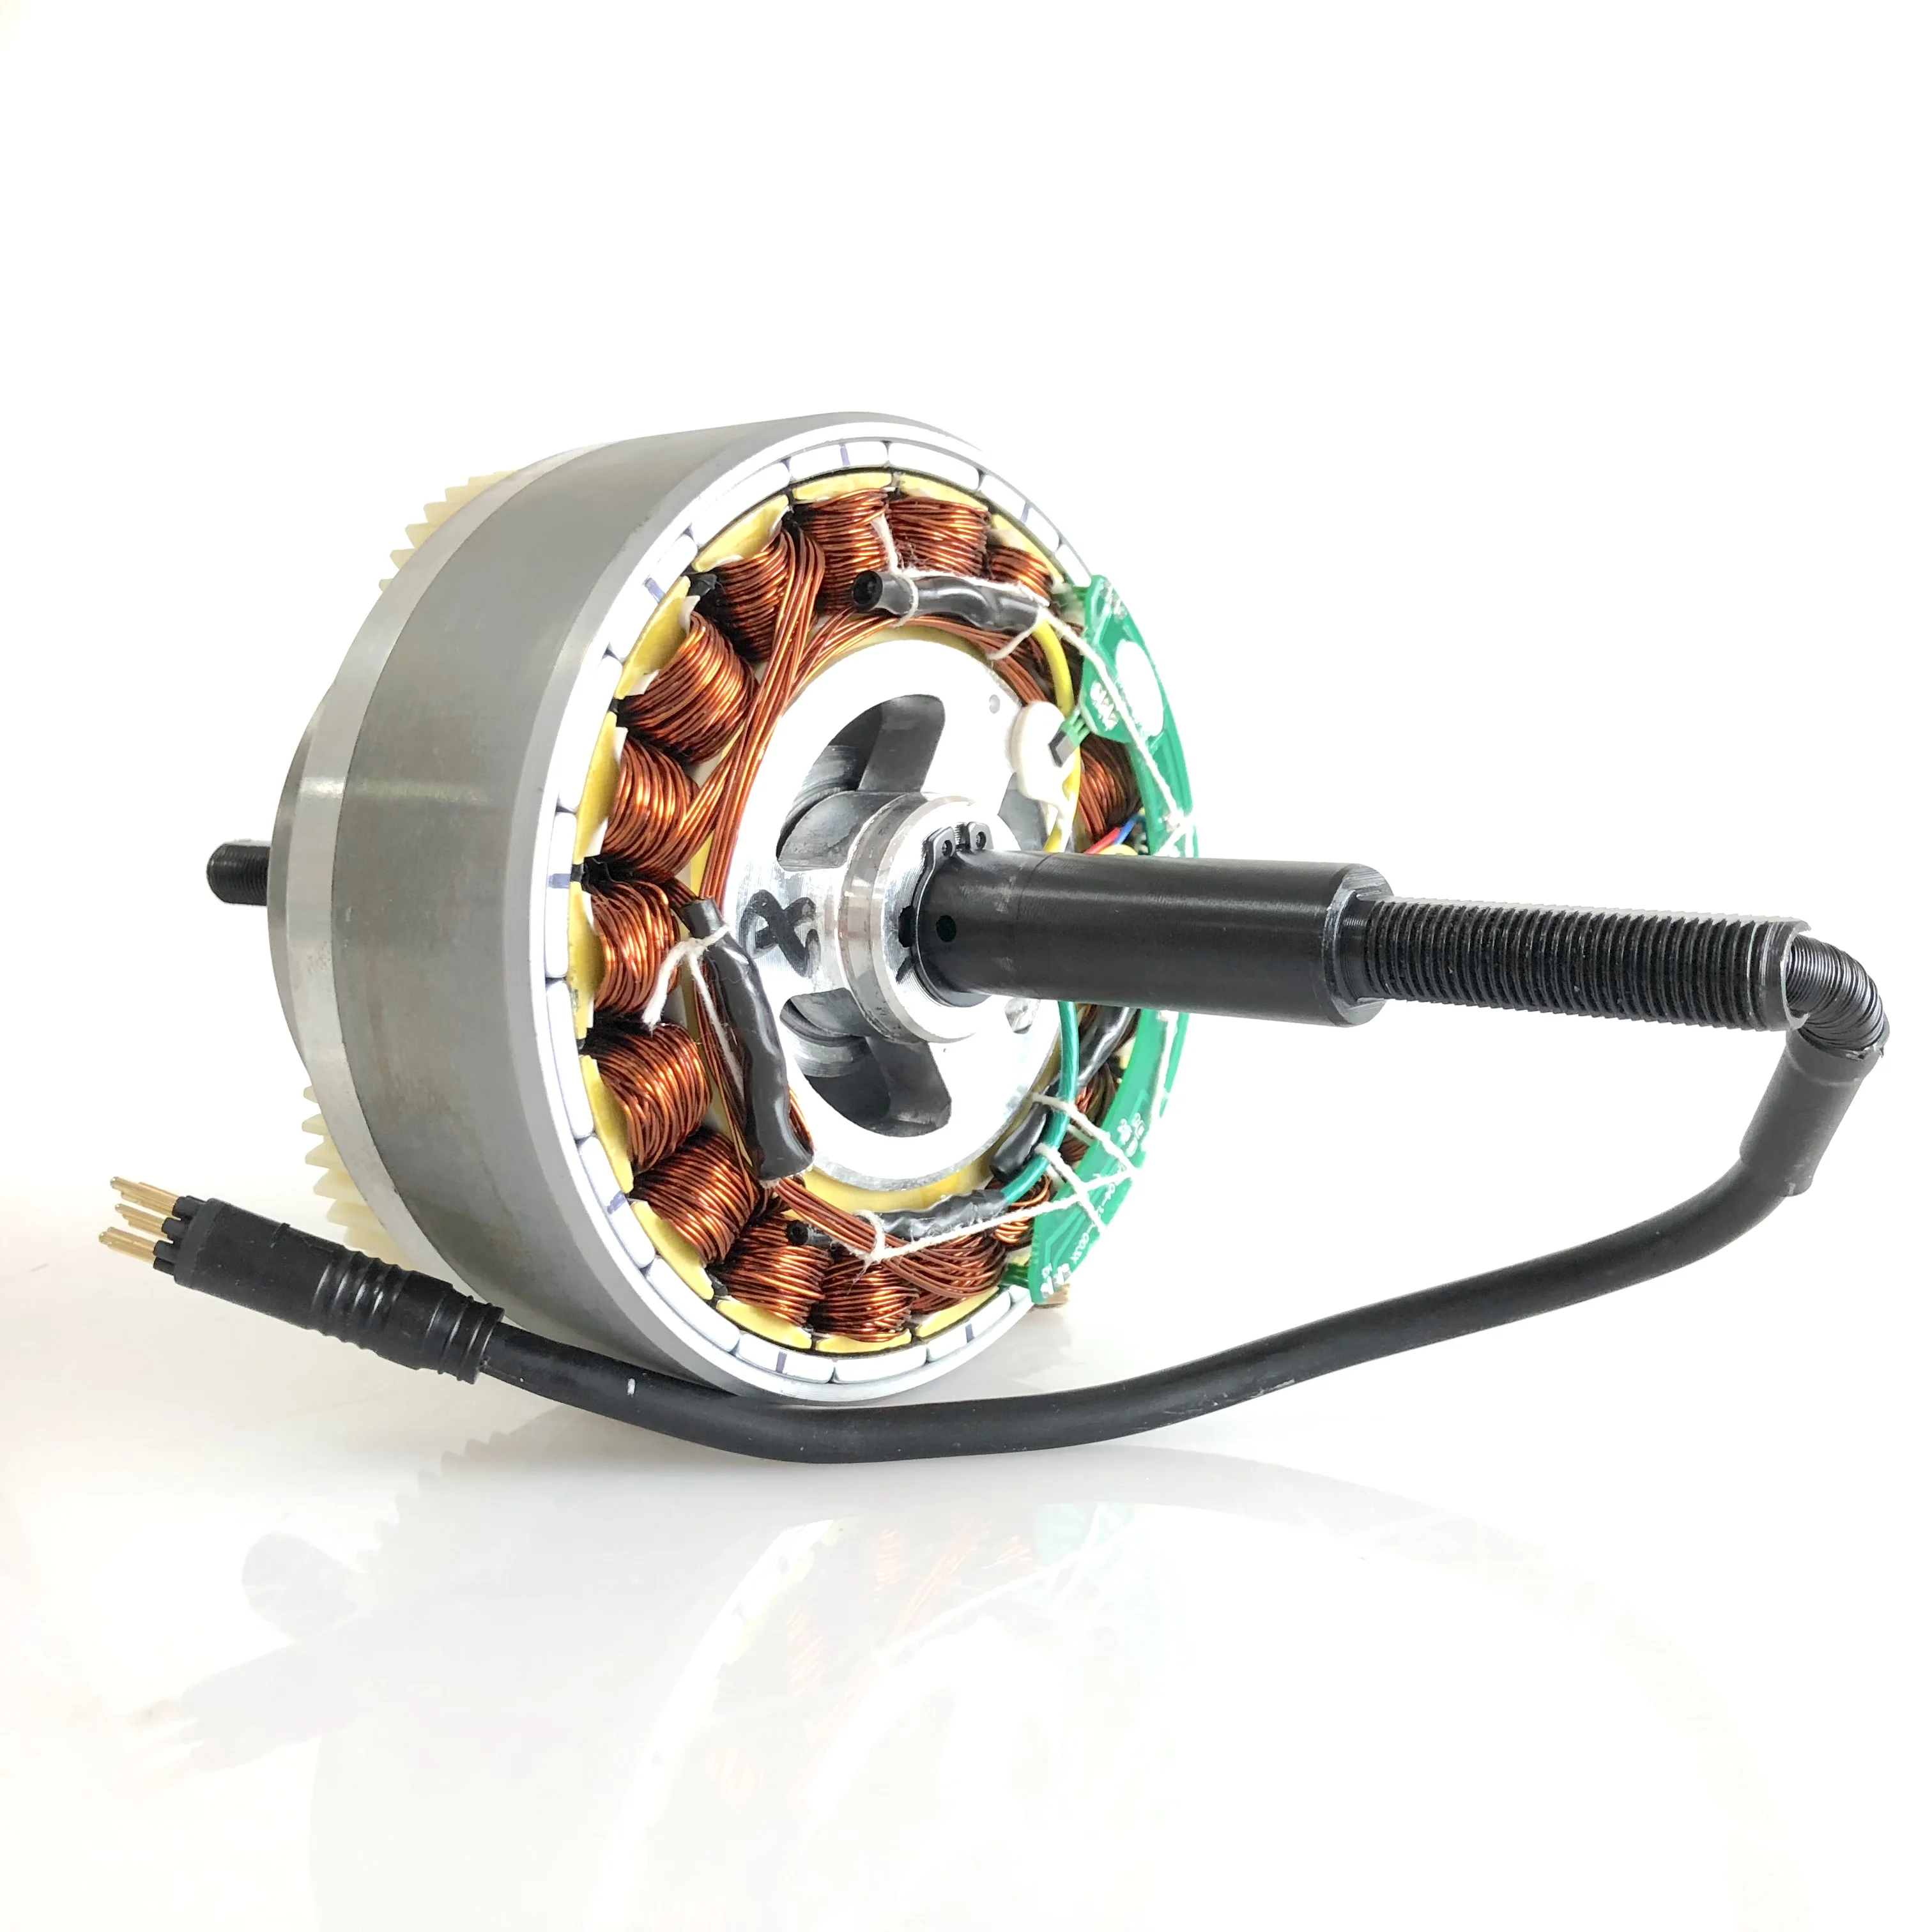 48V500W/750W Magnesium/Aluminum wheel Stator Assembly for FAT Hub Motor Big Foot Mag/Alloy Wheel Replacement 175mm Dropout